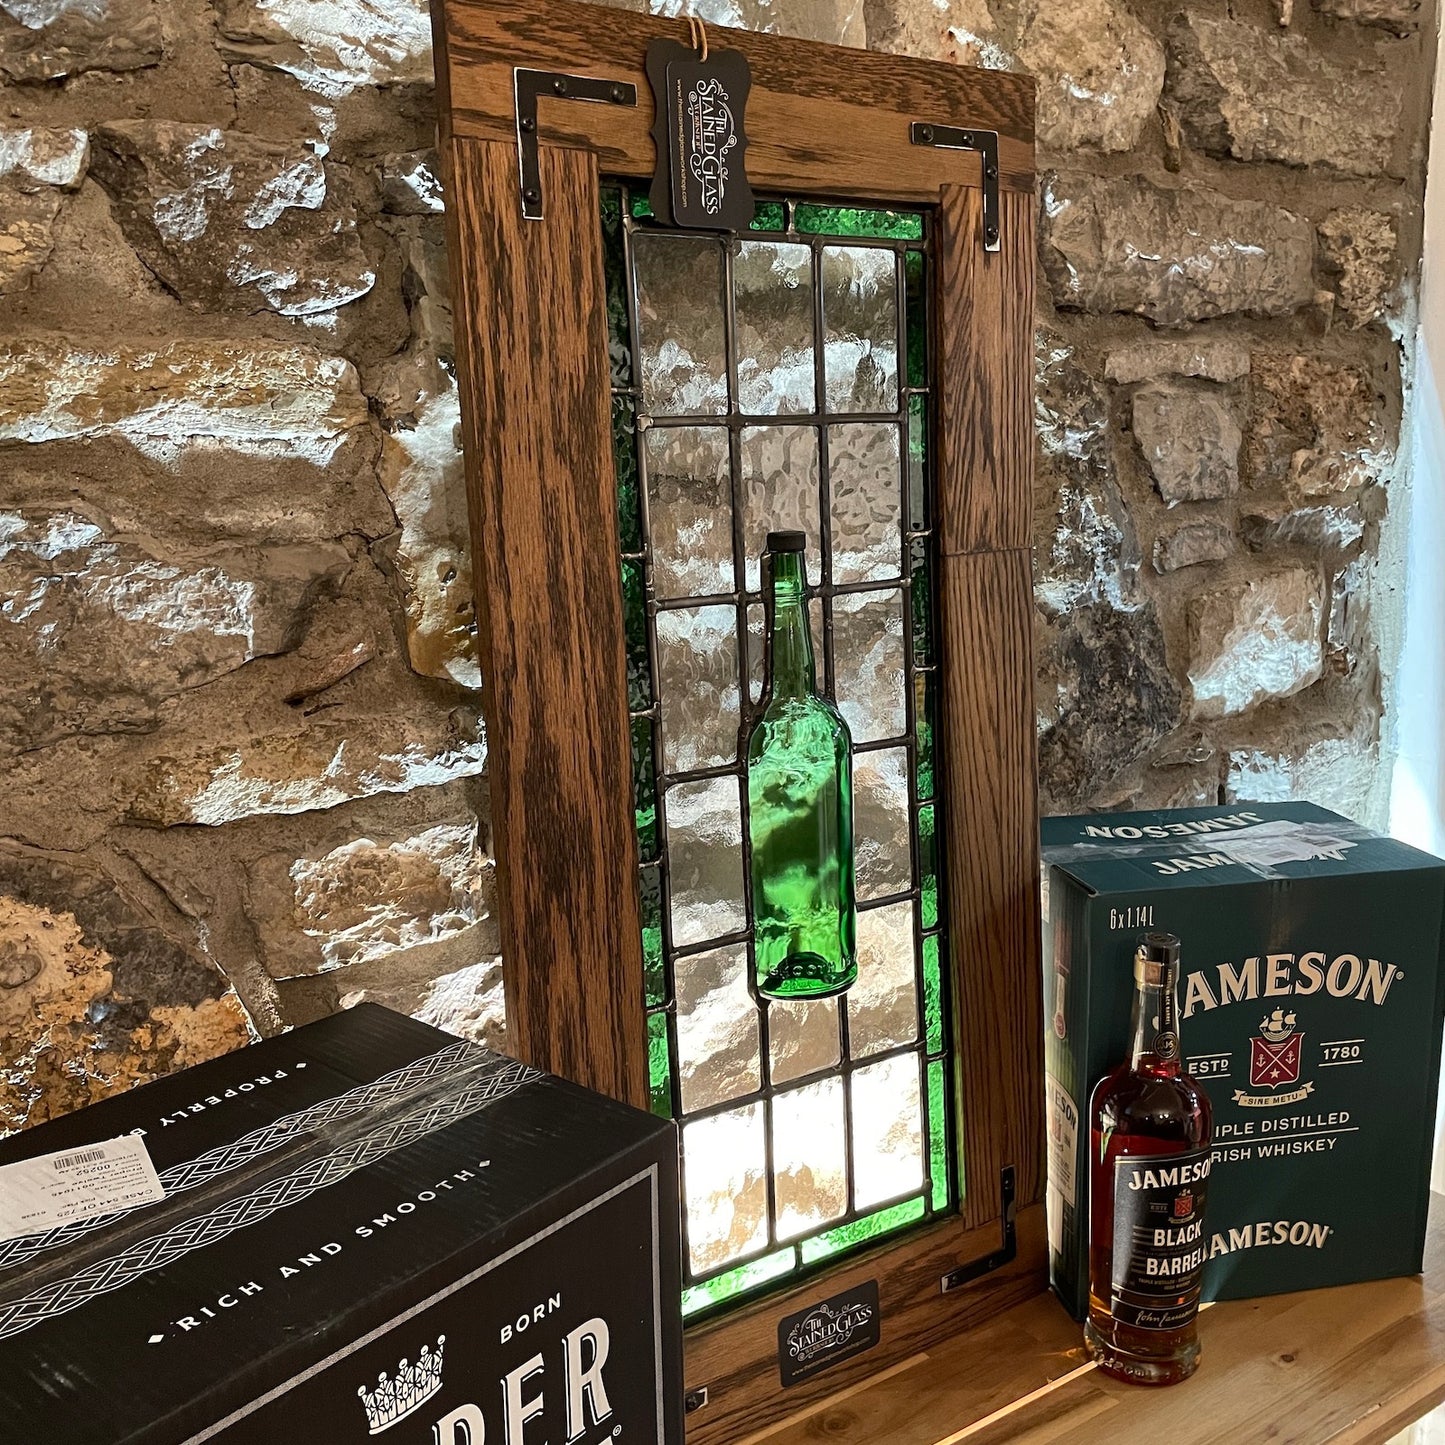 Half Bottle Stained Glass Panel - Whiskey, Wine, Beer of Your Choice.